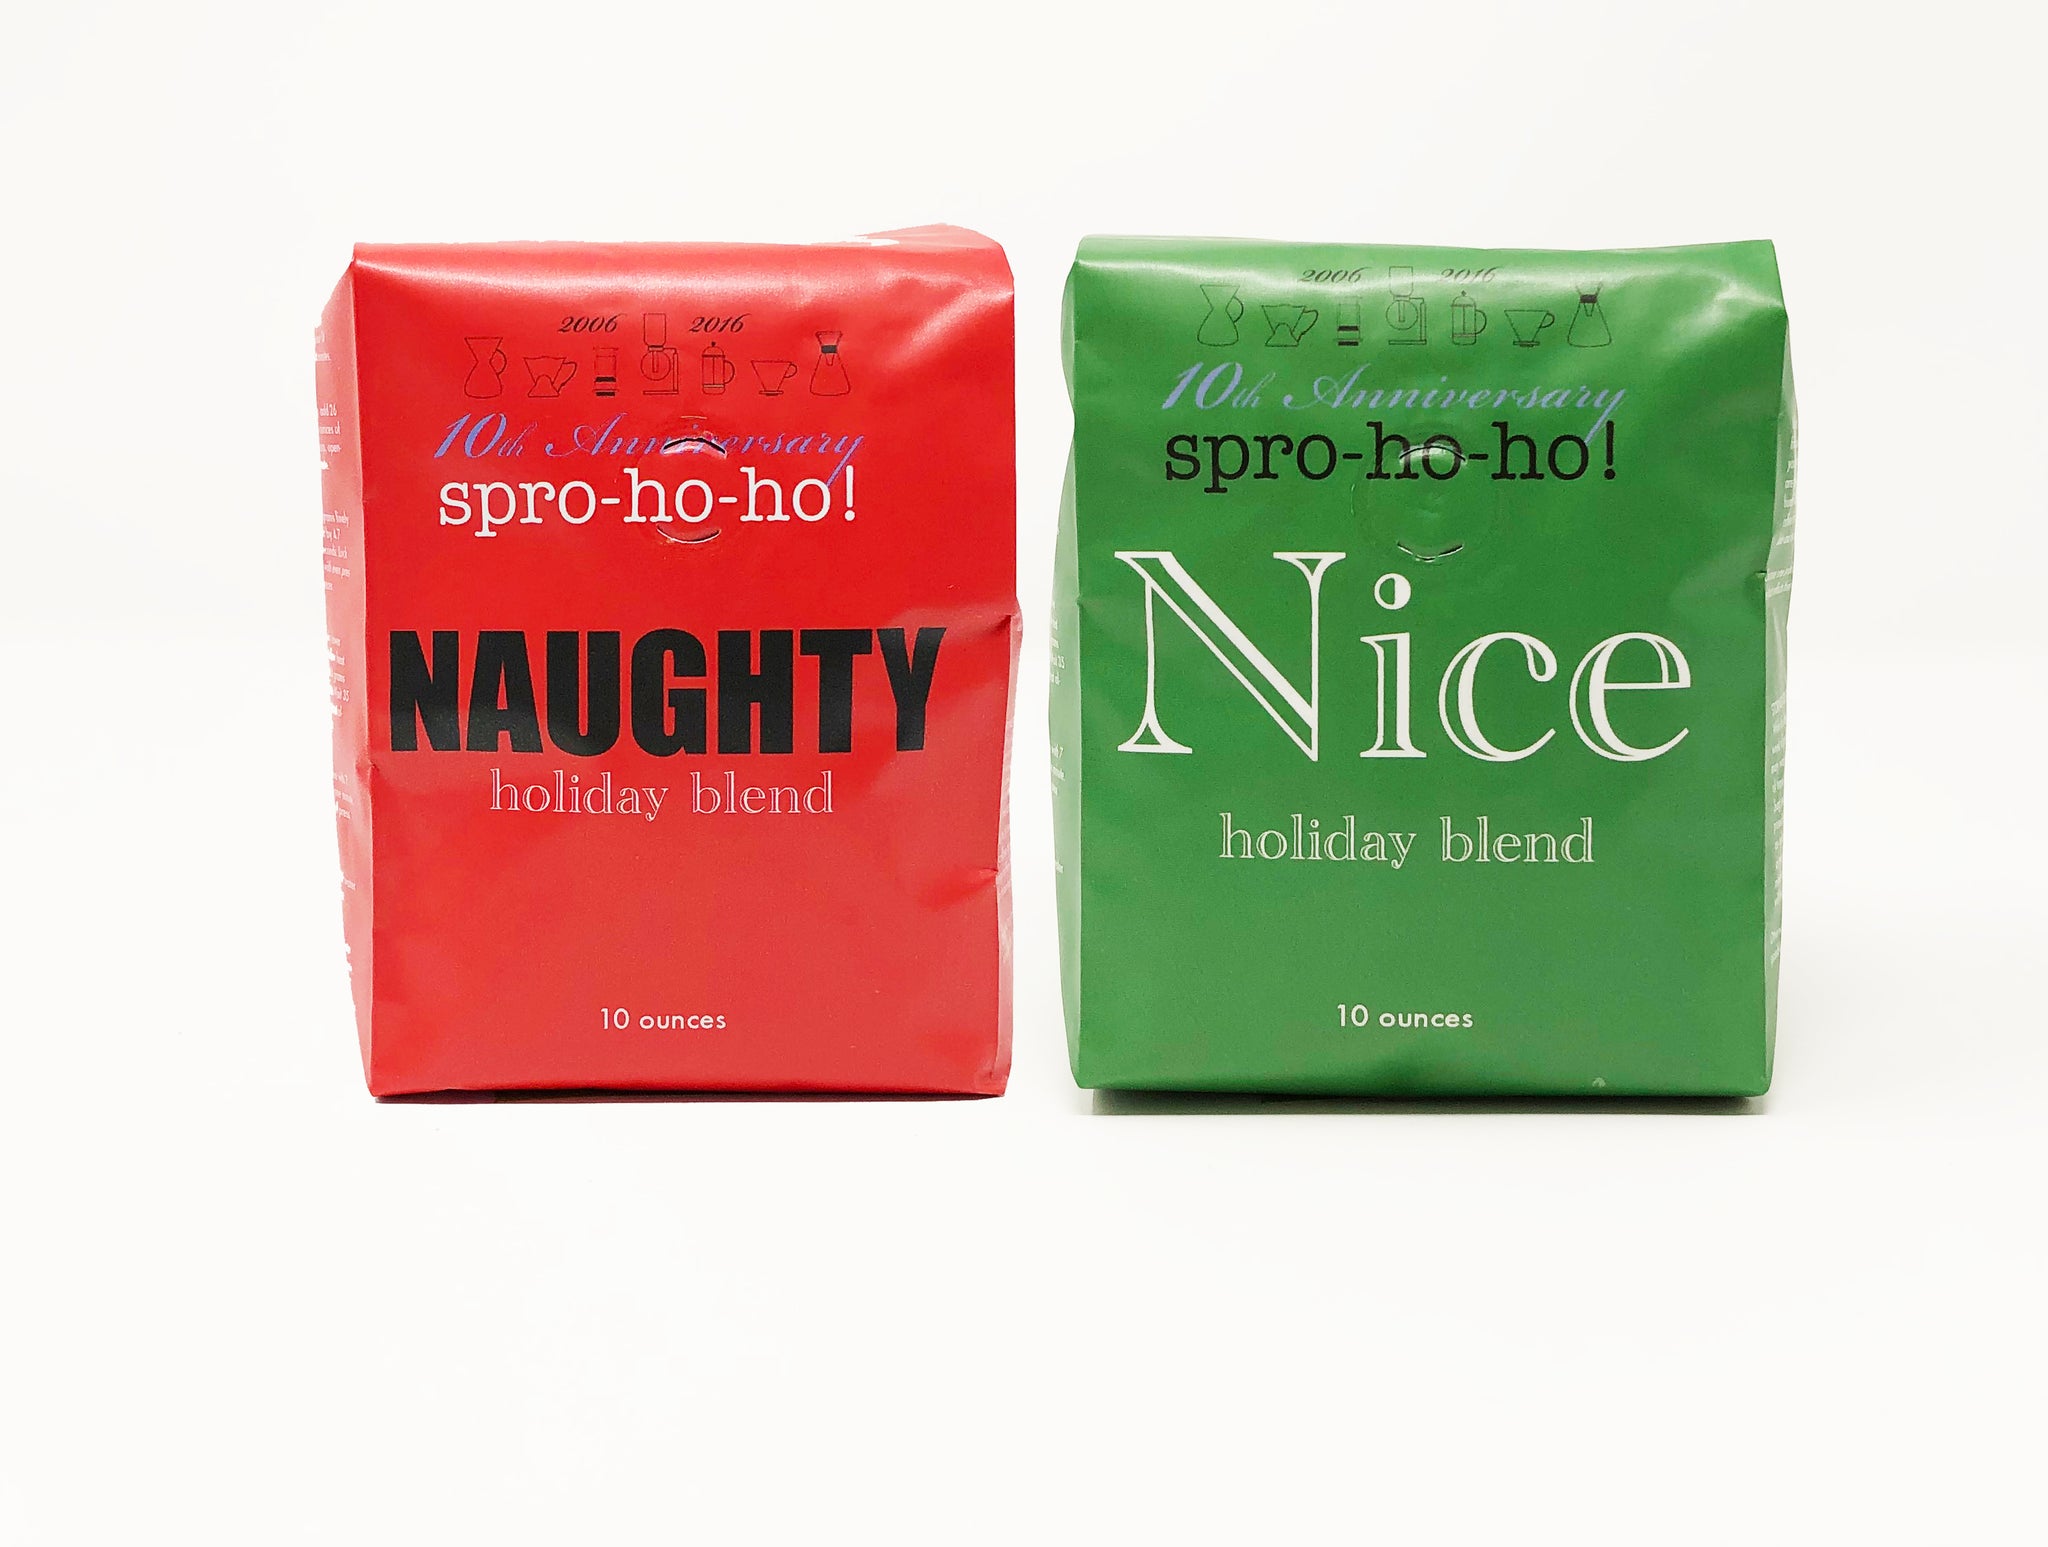 The Naughty & Nice Collection